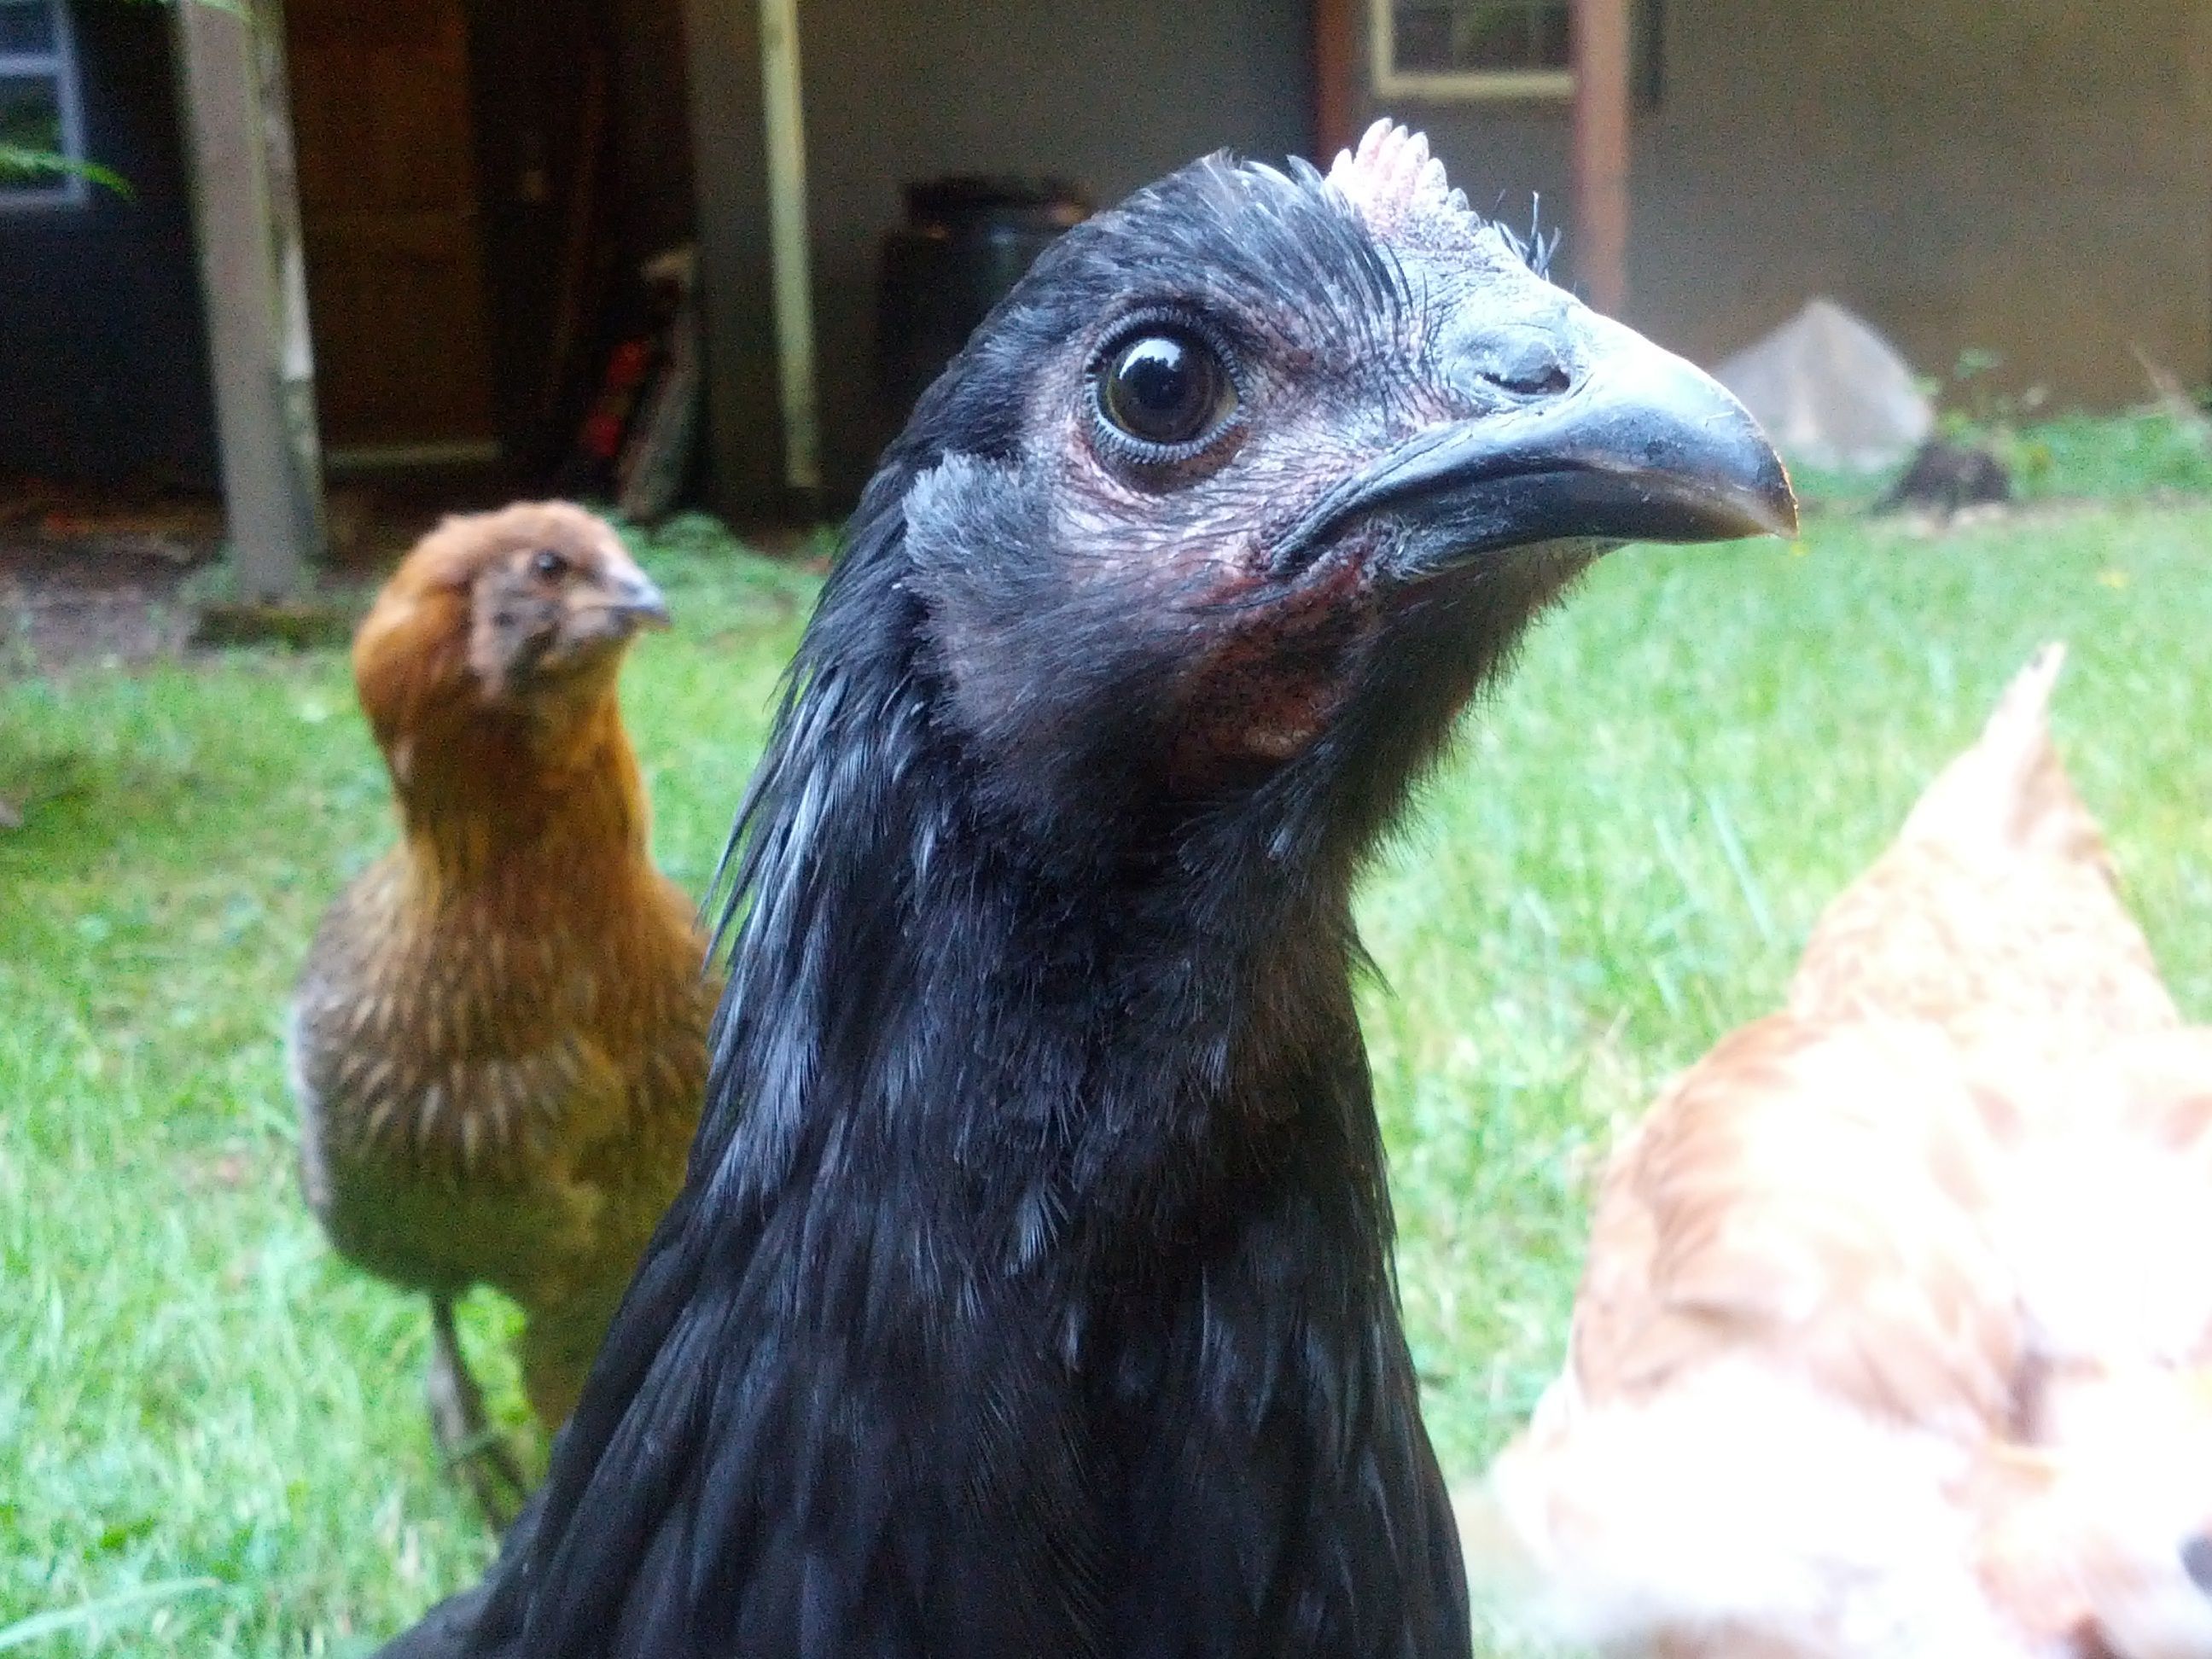 Ruth, our australorp